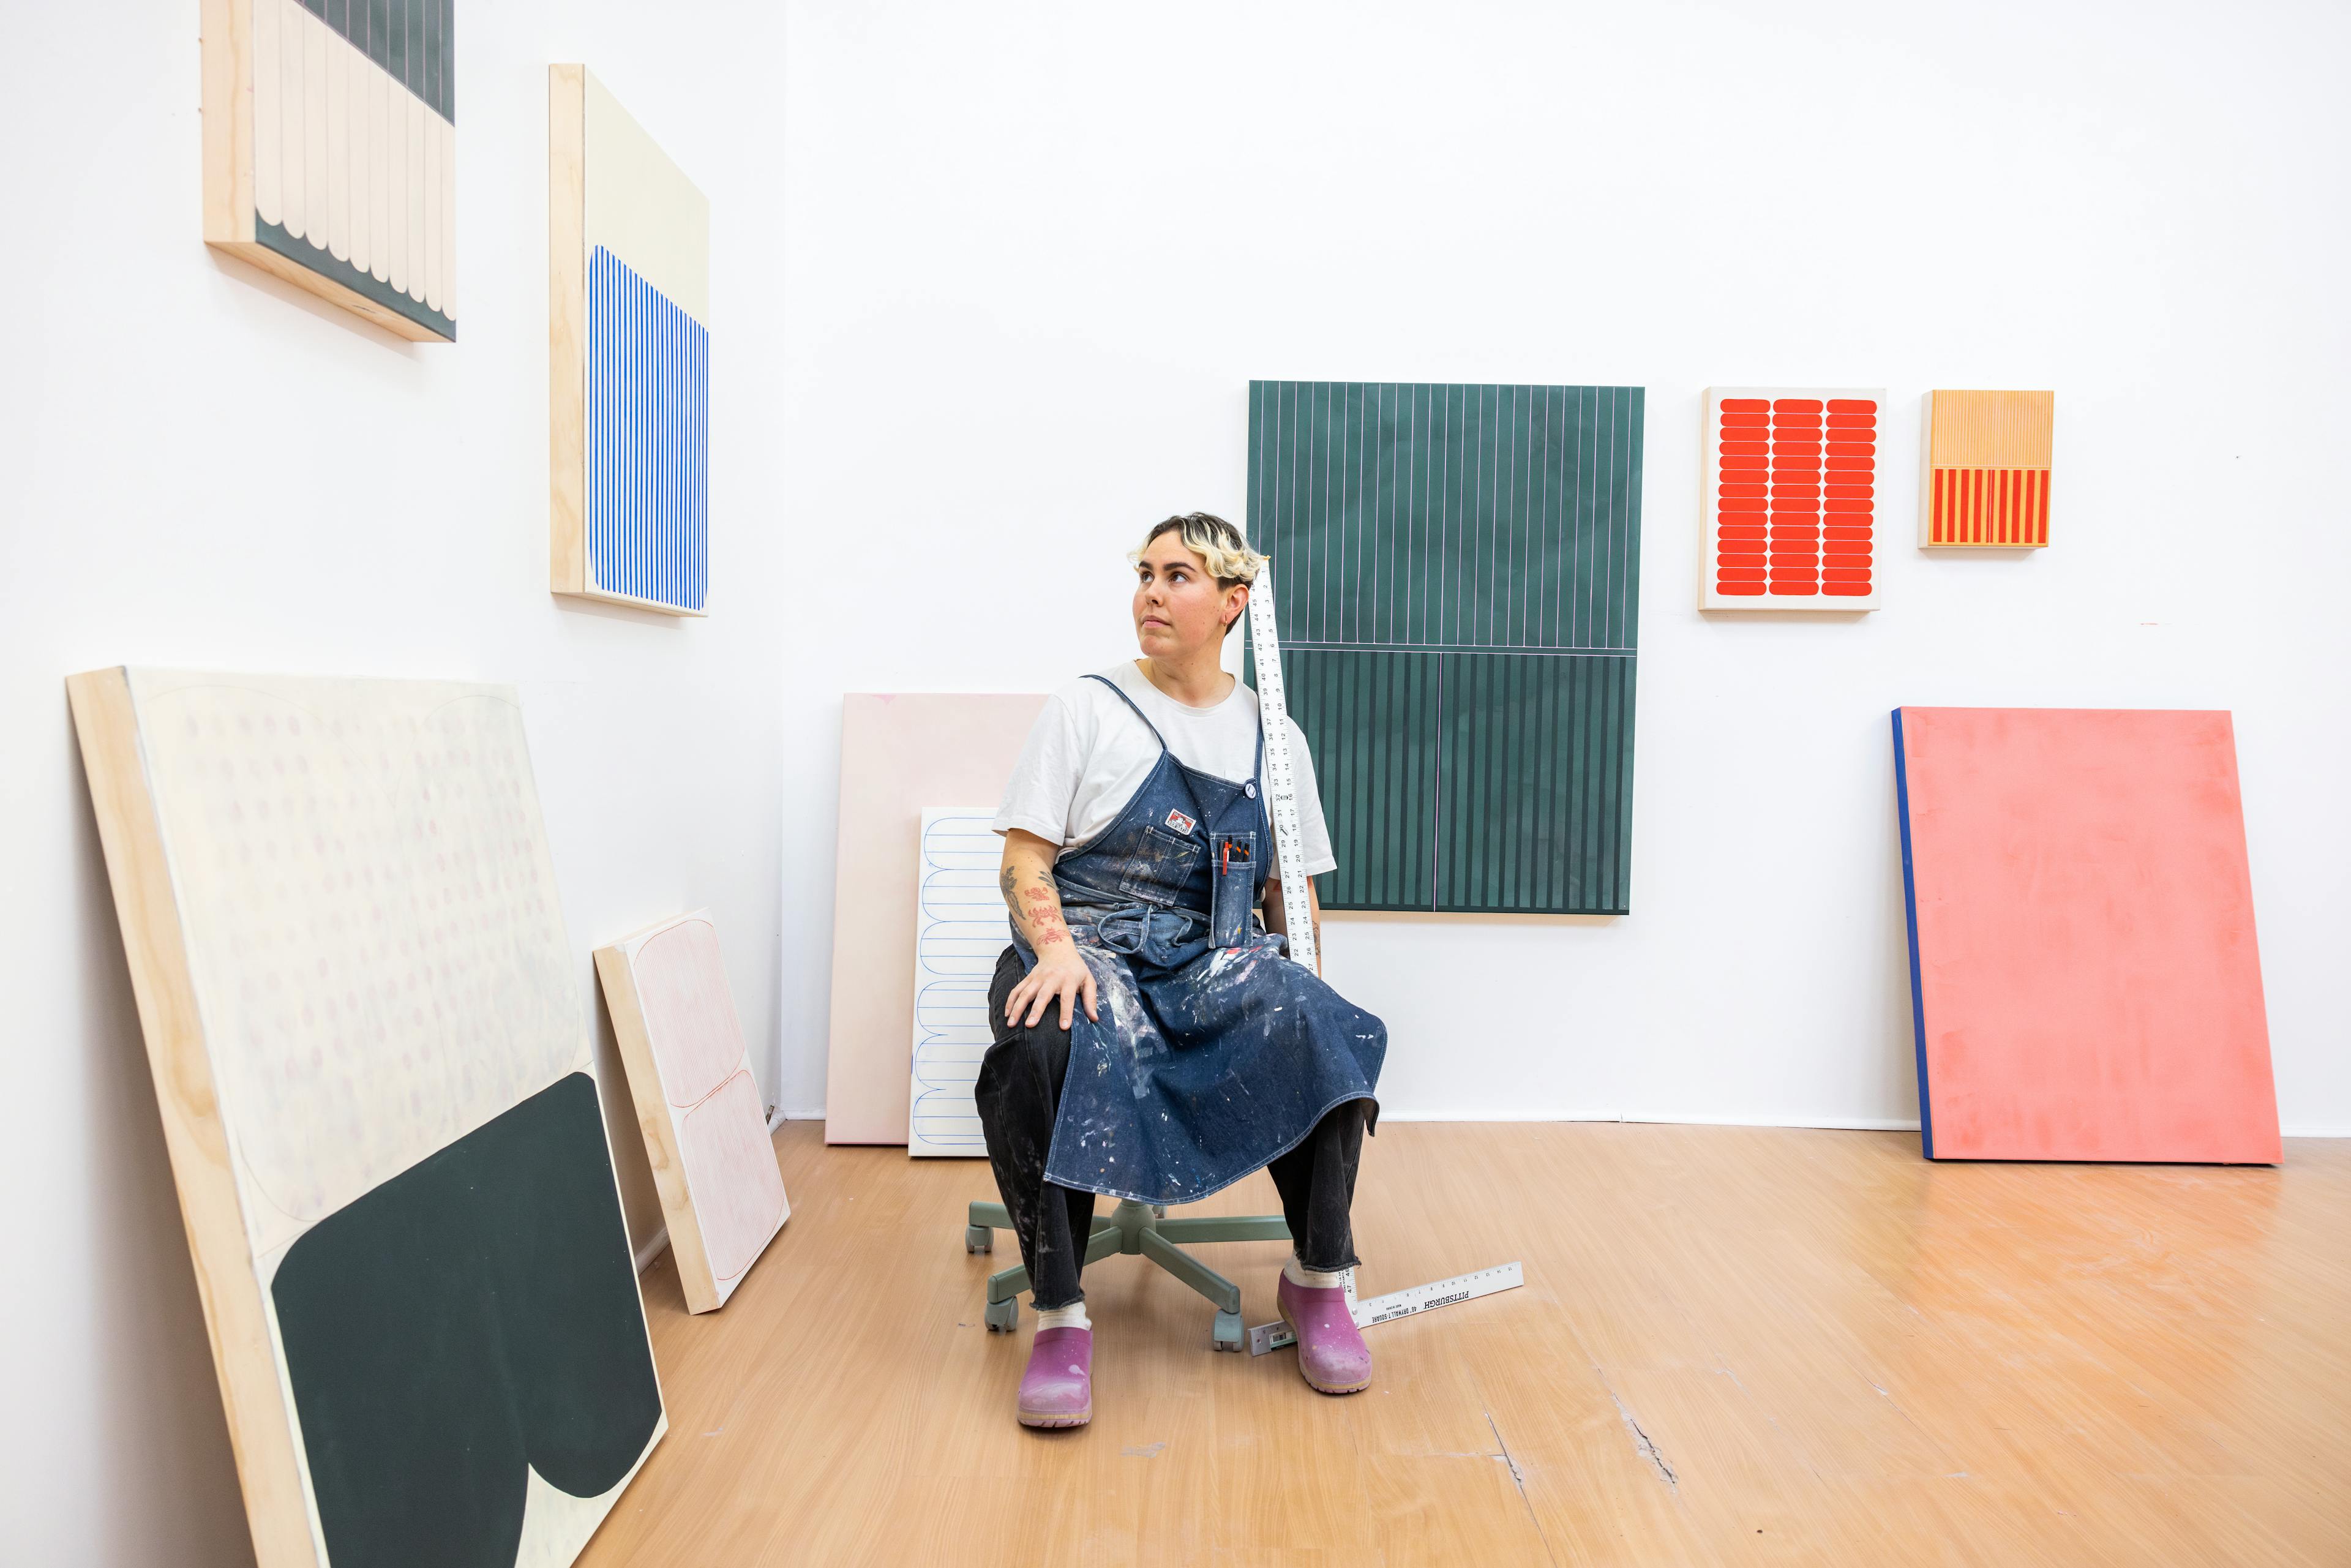 Artist Arielle Zamora in the studio sitting on a stool surrounded by their minimalist, abstract paintings.